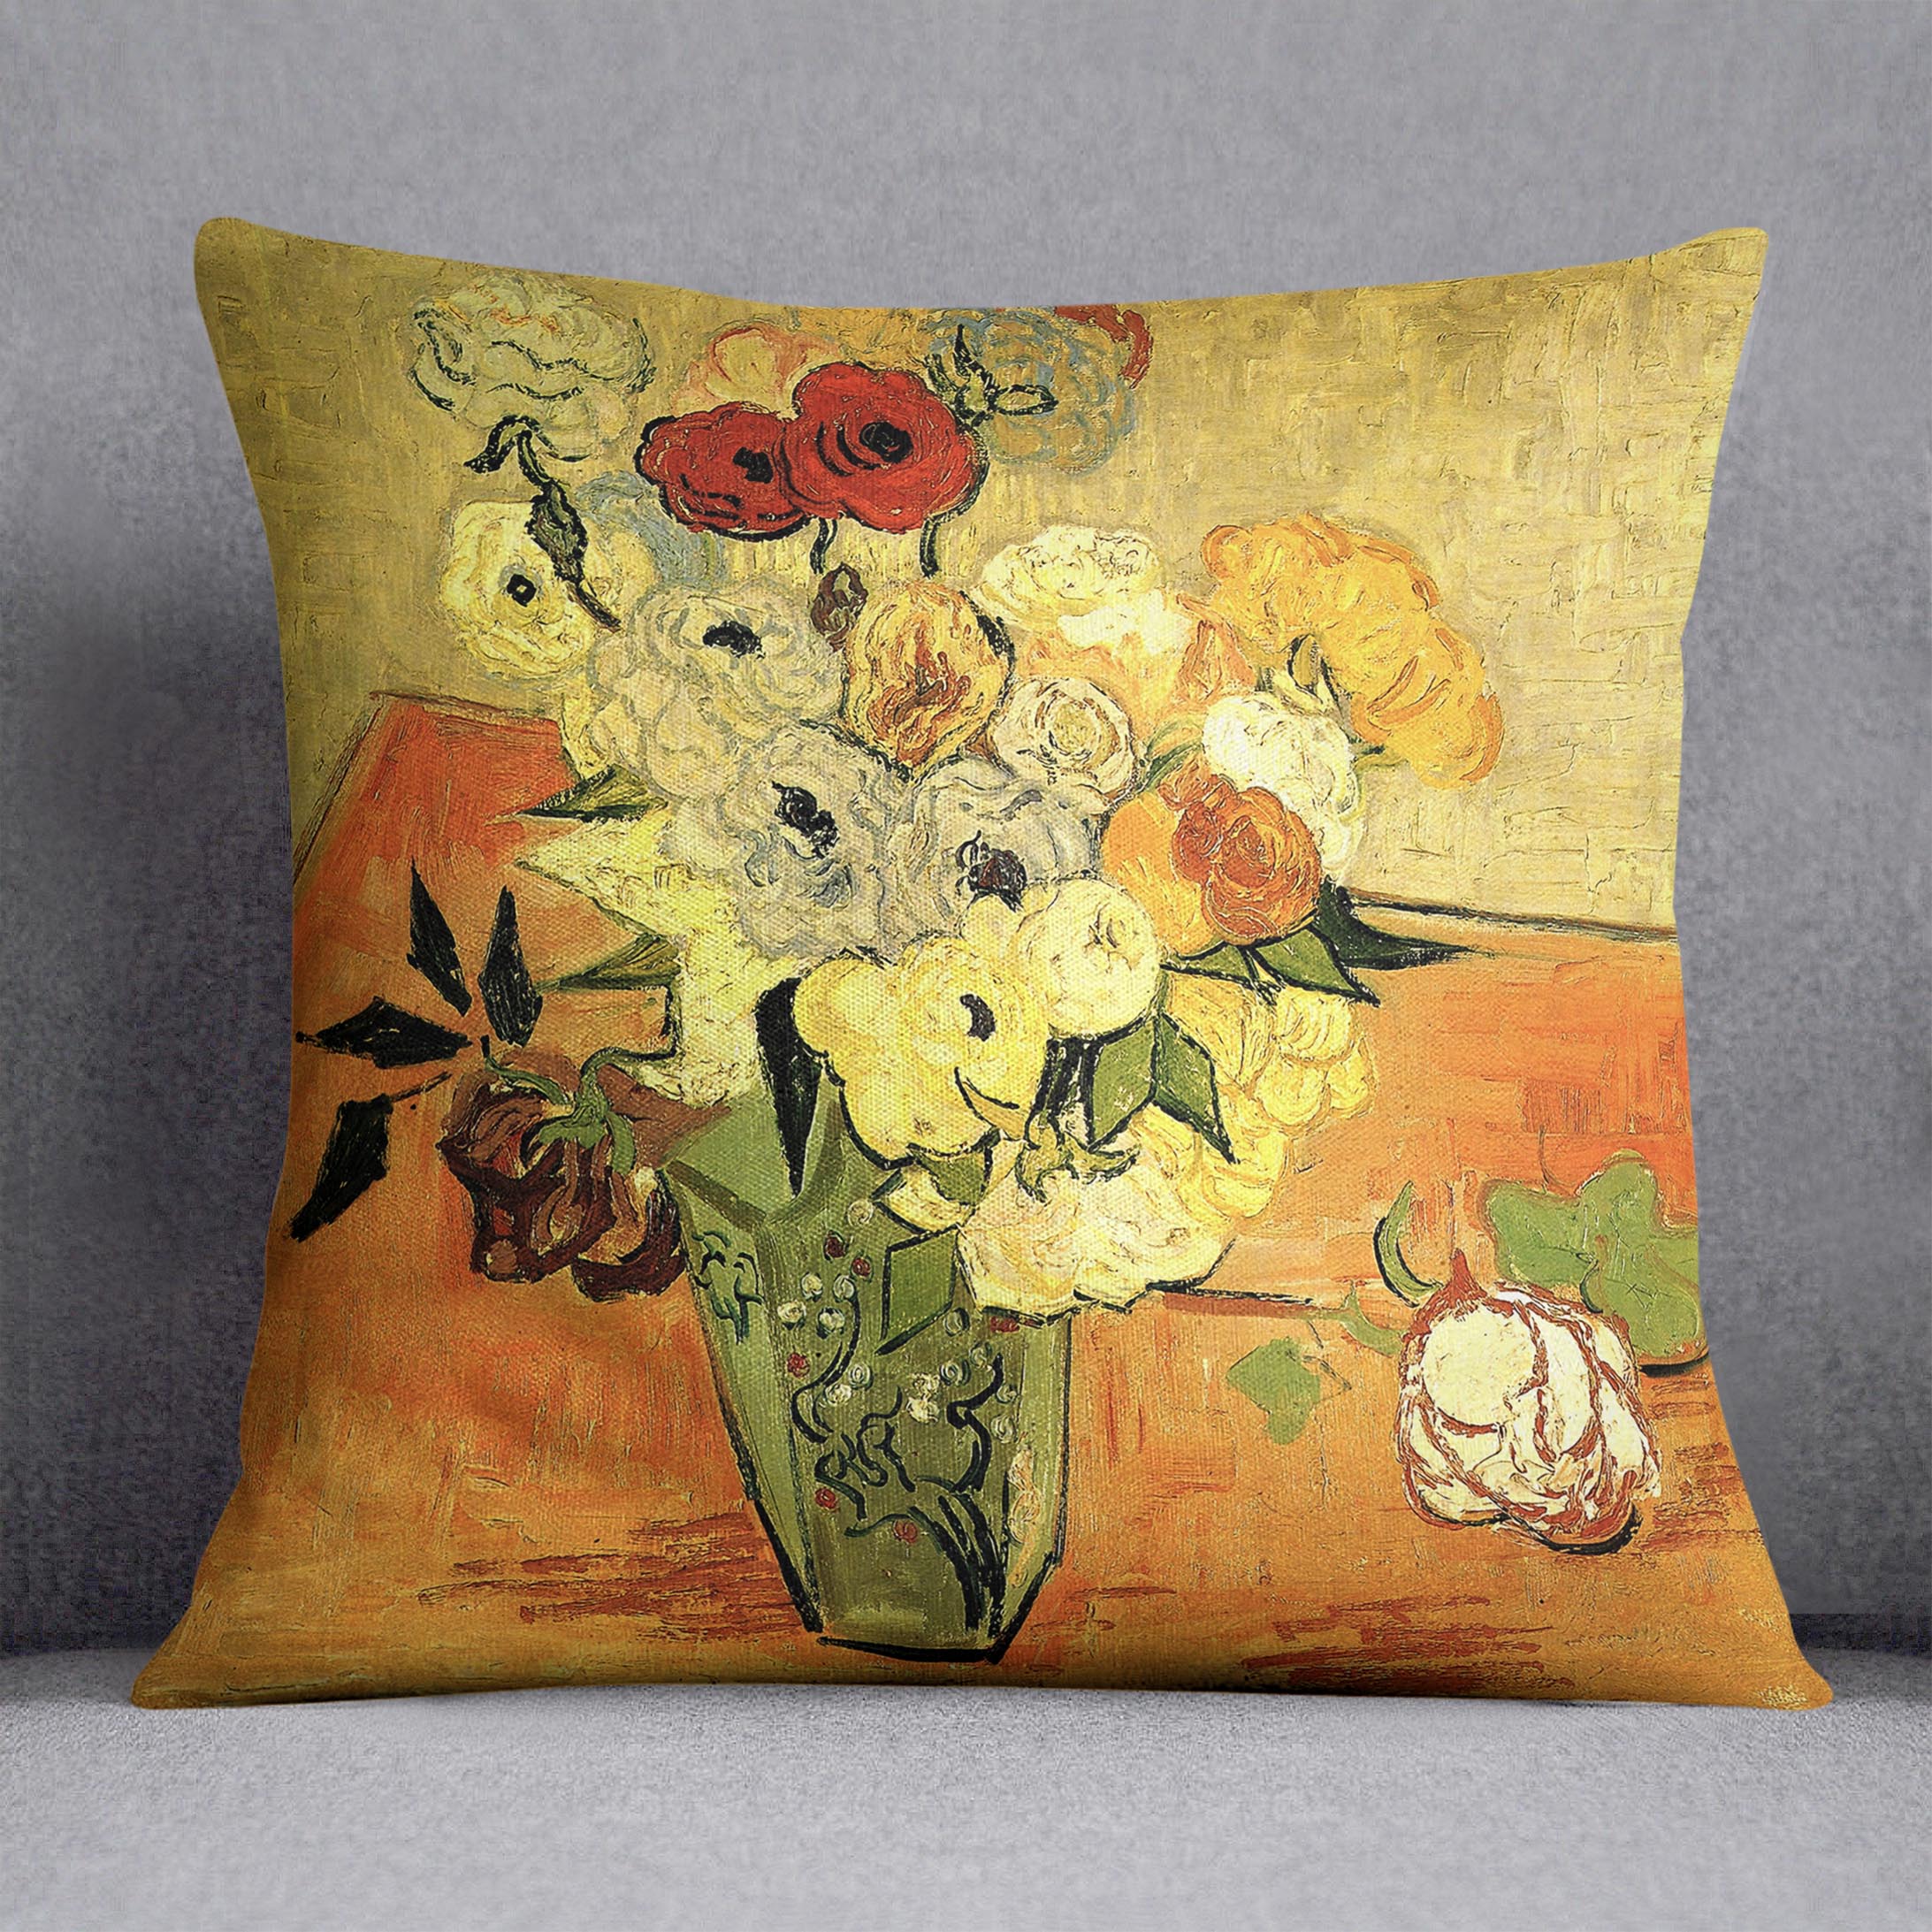 Still Life Japanese Vase with Roses and Anemones by Van Gogh Cushion